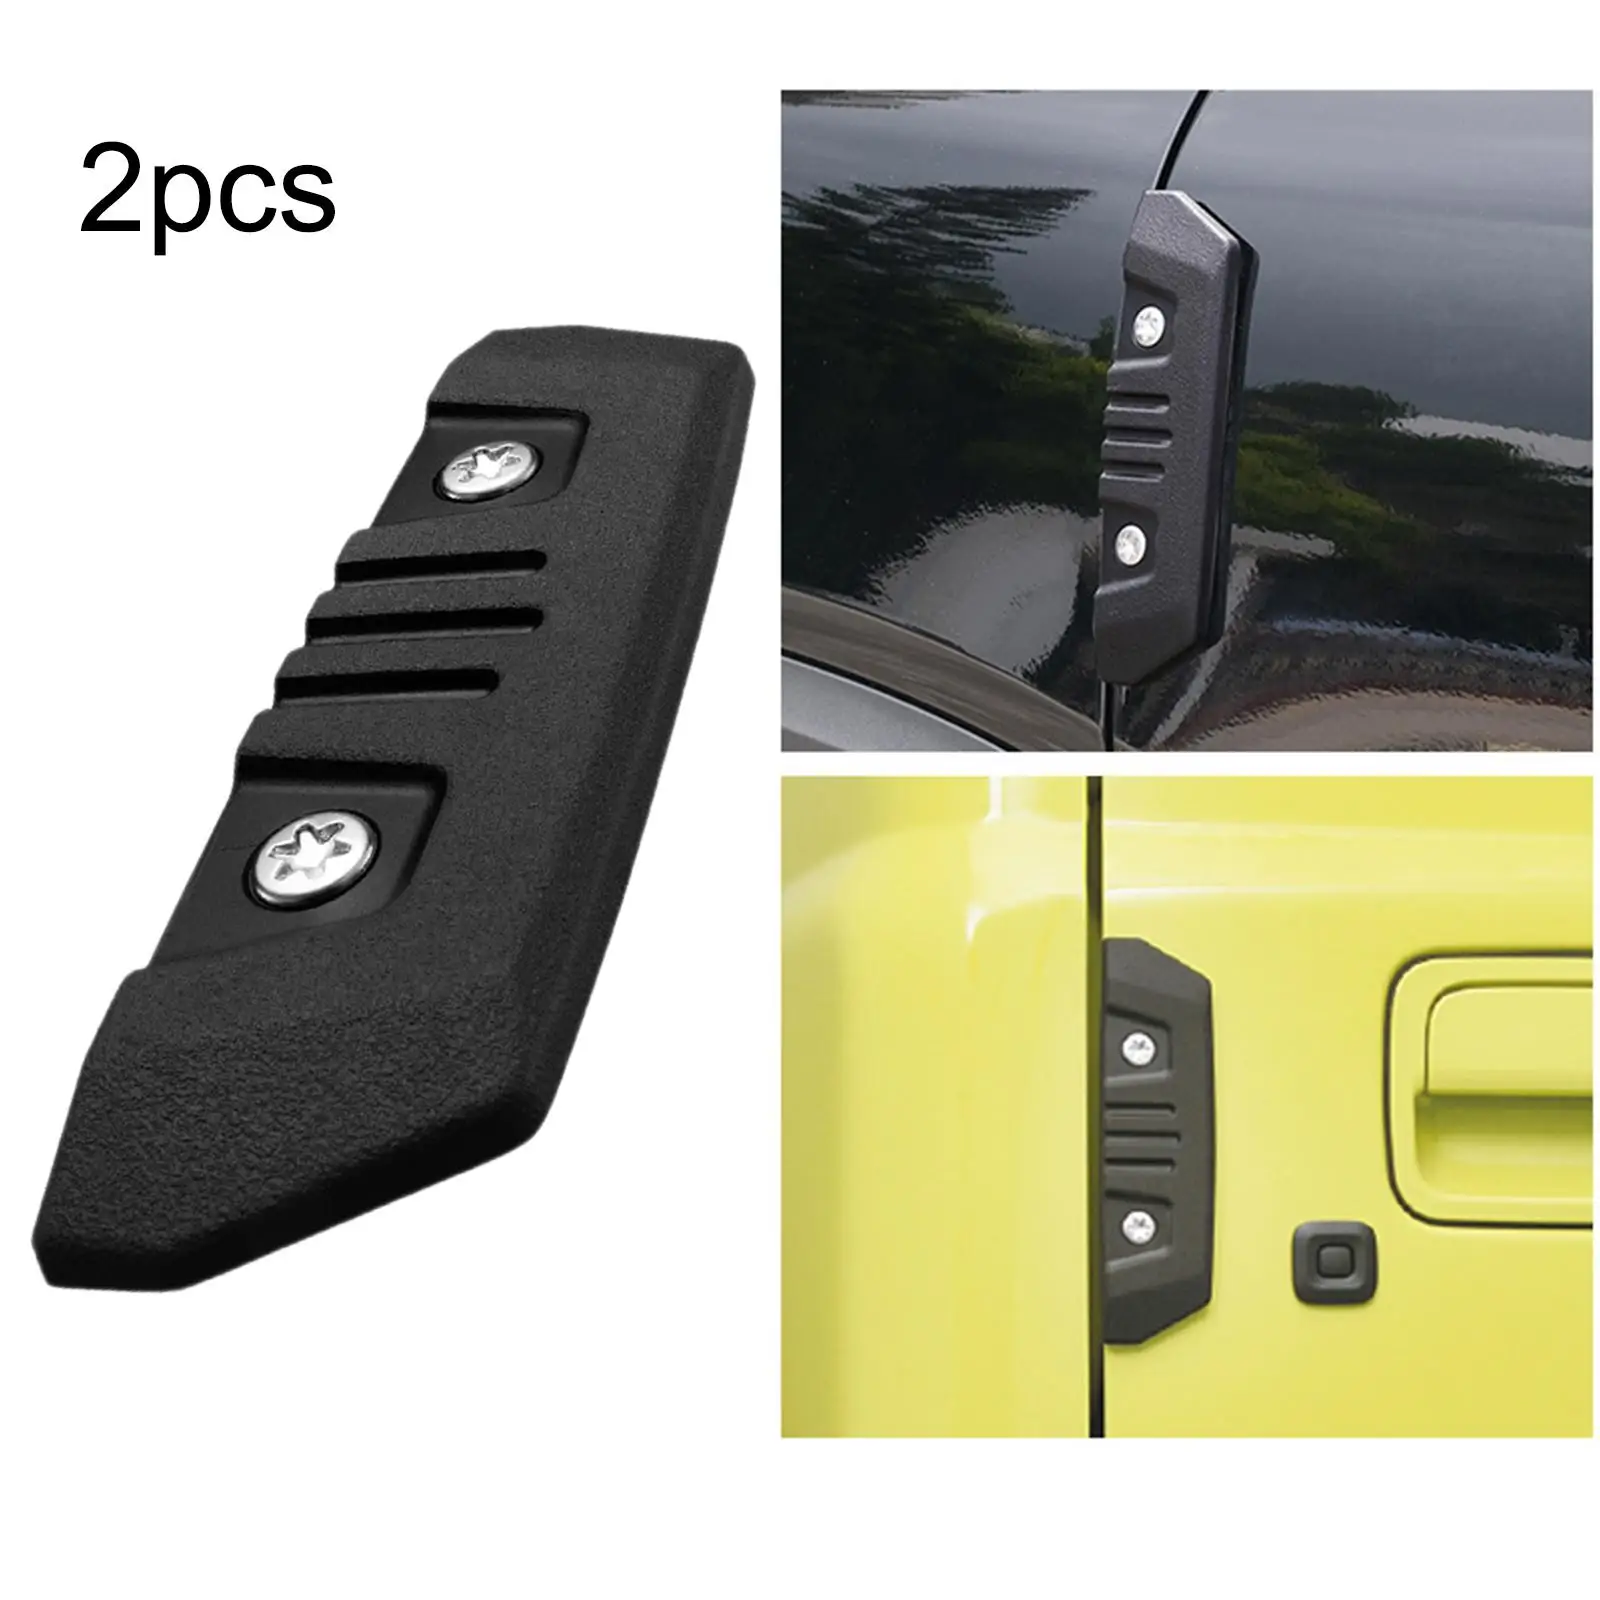 2 Pieces Generic Car Side Door Edge Guards Buffers for RV SUV Pickup